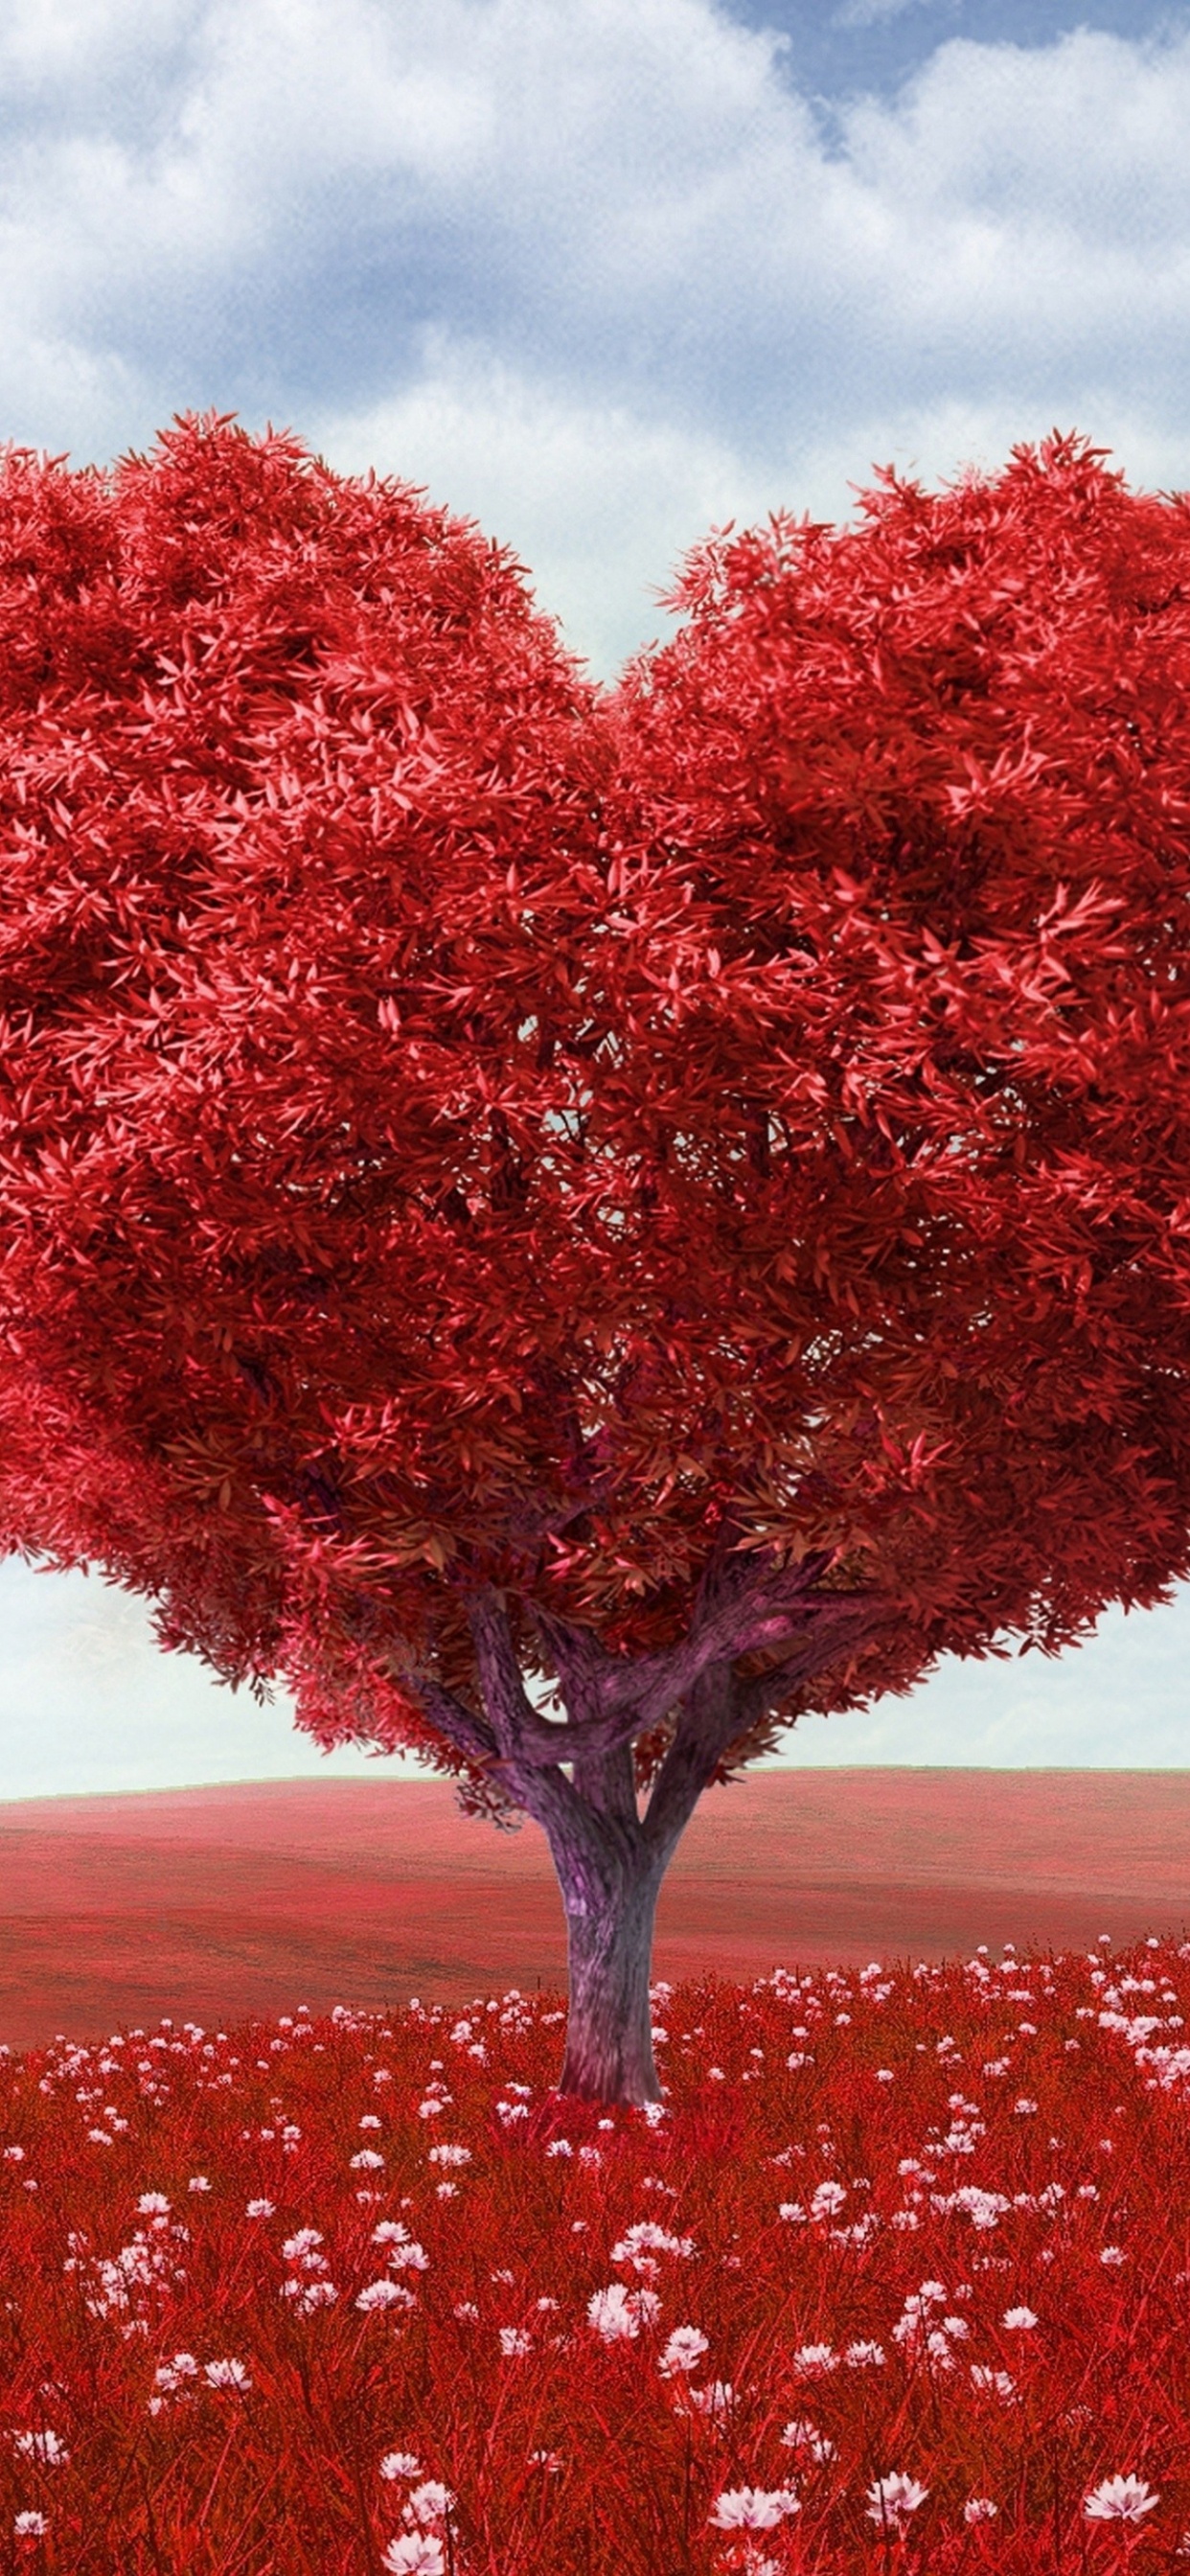 Red Leaf Tree Under Cloudy Sky During Daytime. Wallpaper in 1242x2688 Resolution